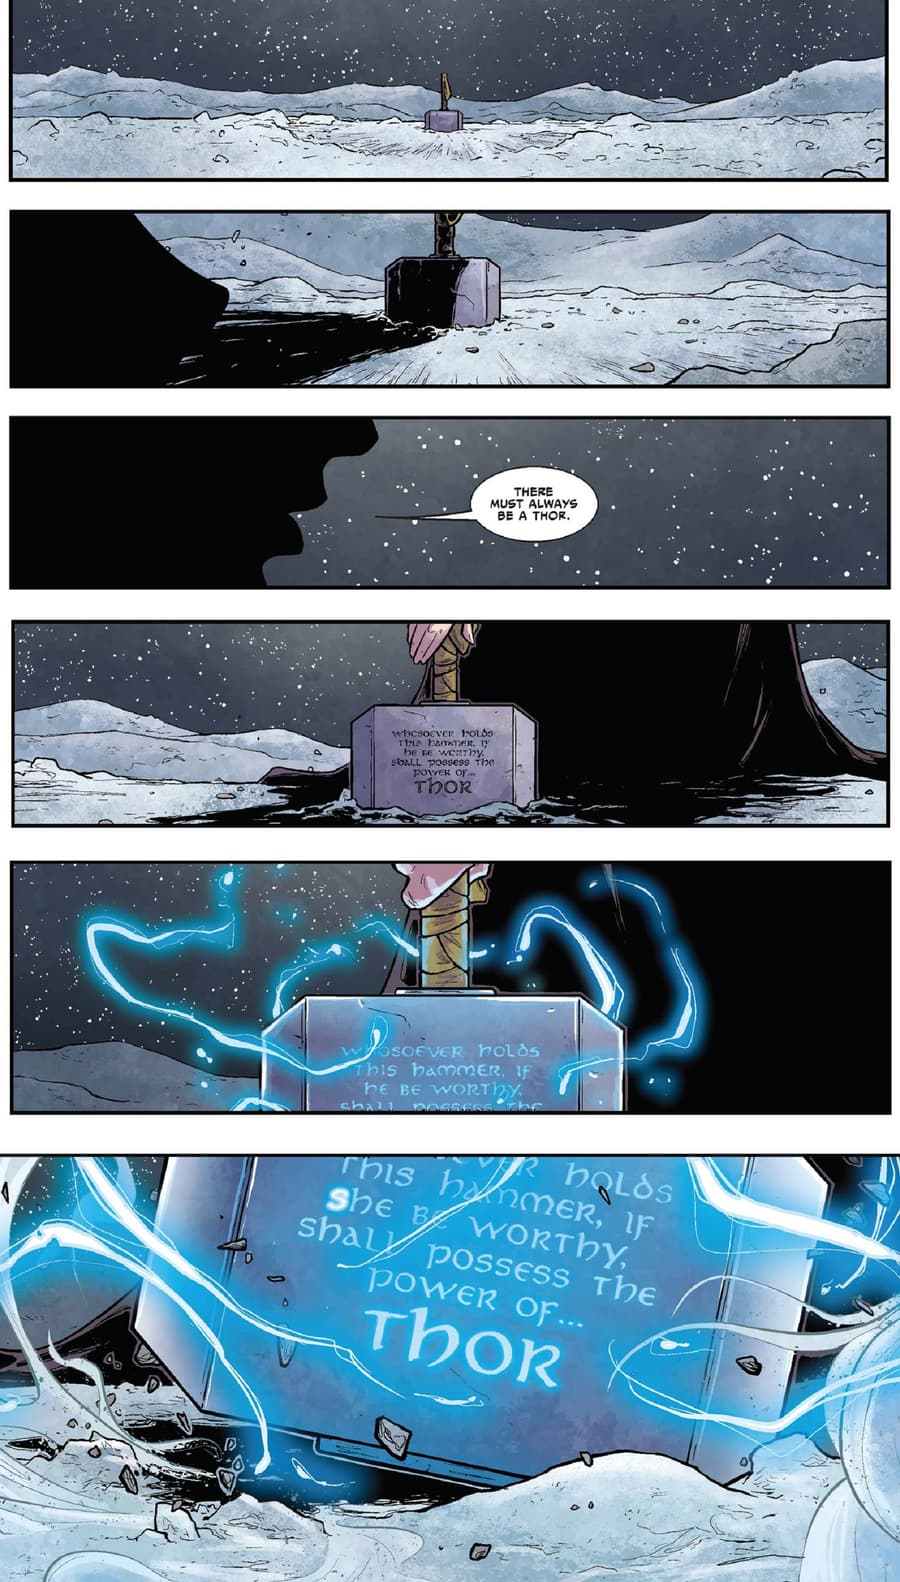 “Let she who is worthy” in THOR (2014) #1!